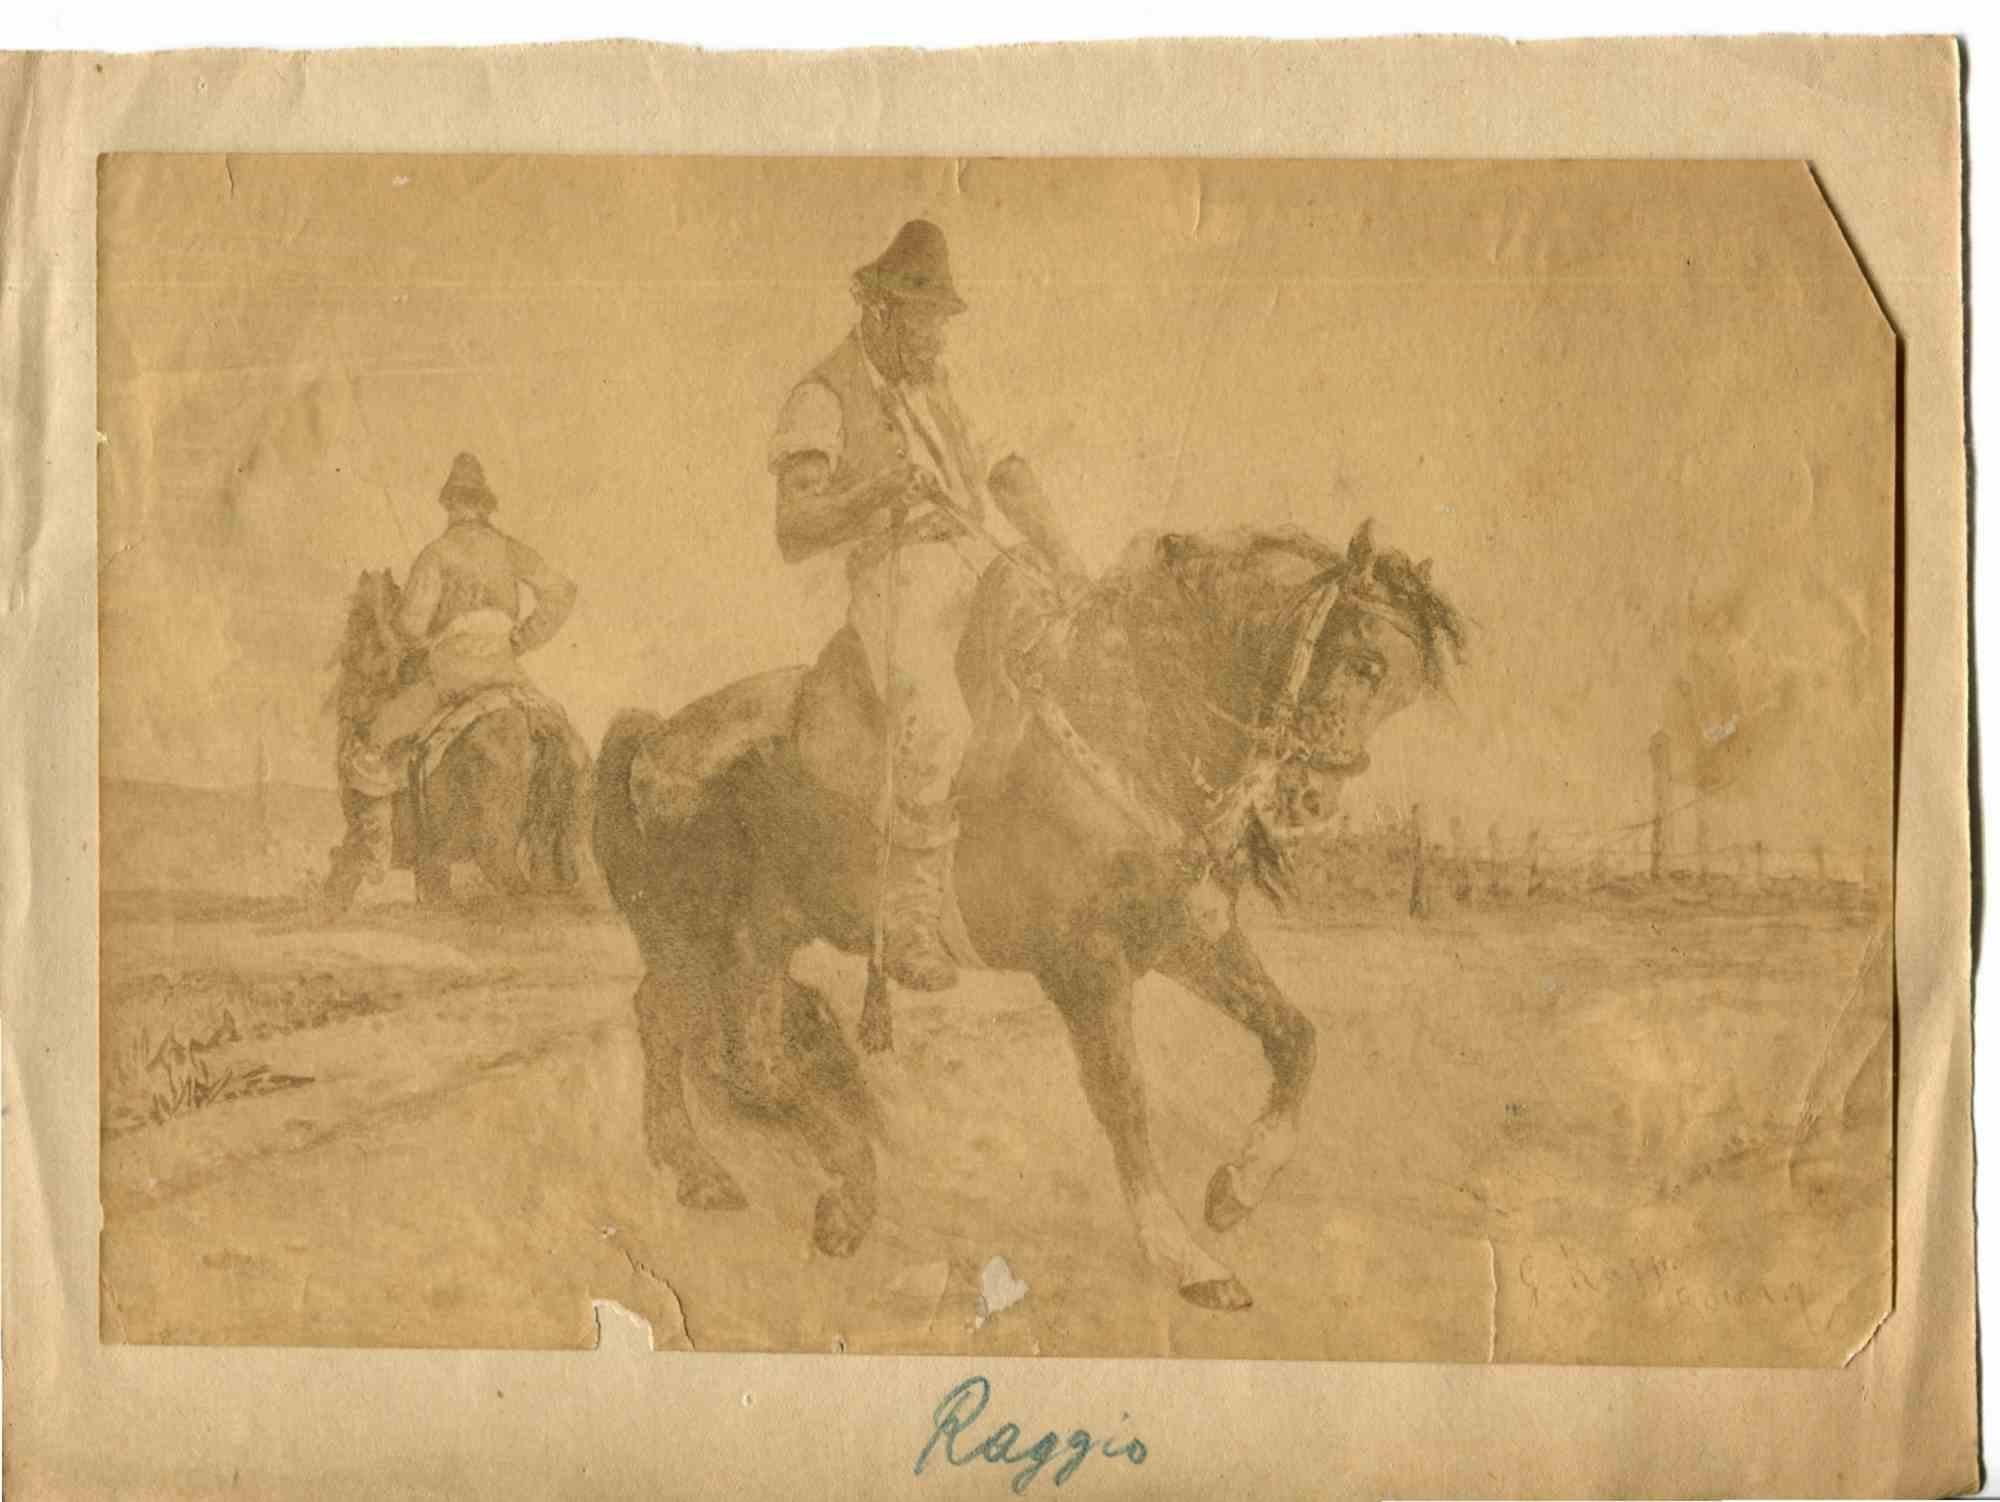 Unknown Portrait Photograph - Riders - Photo- Early 20th Century